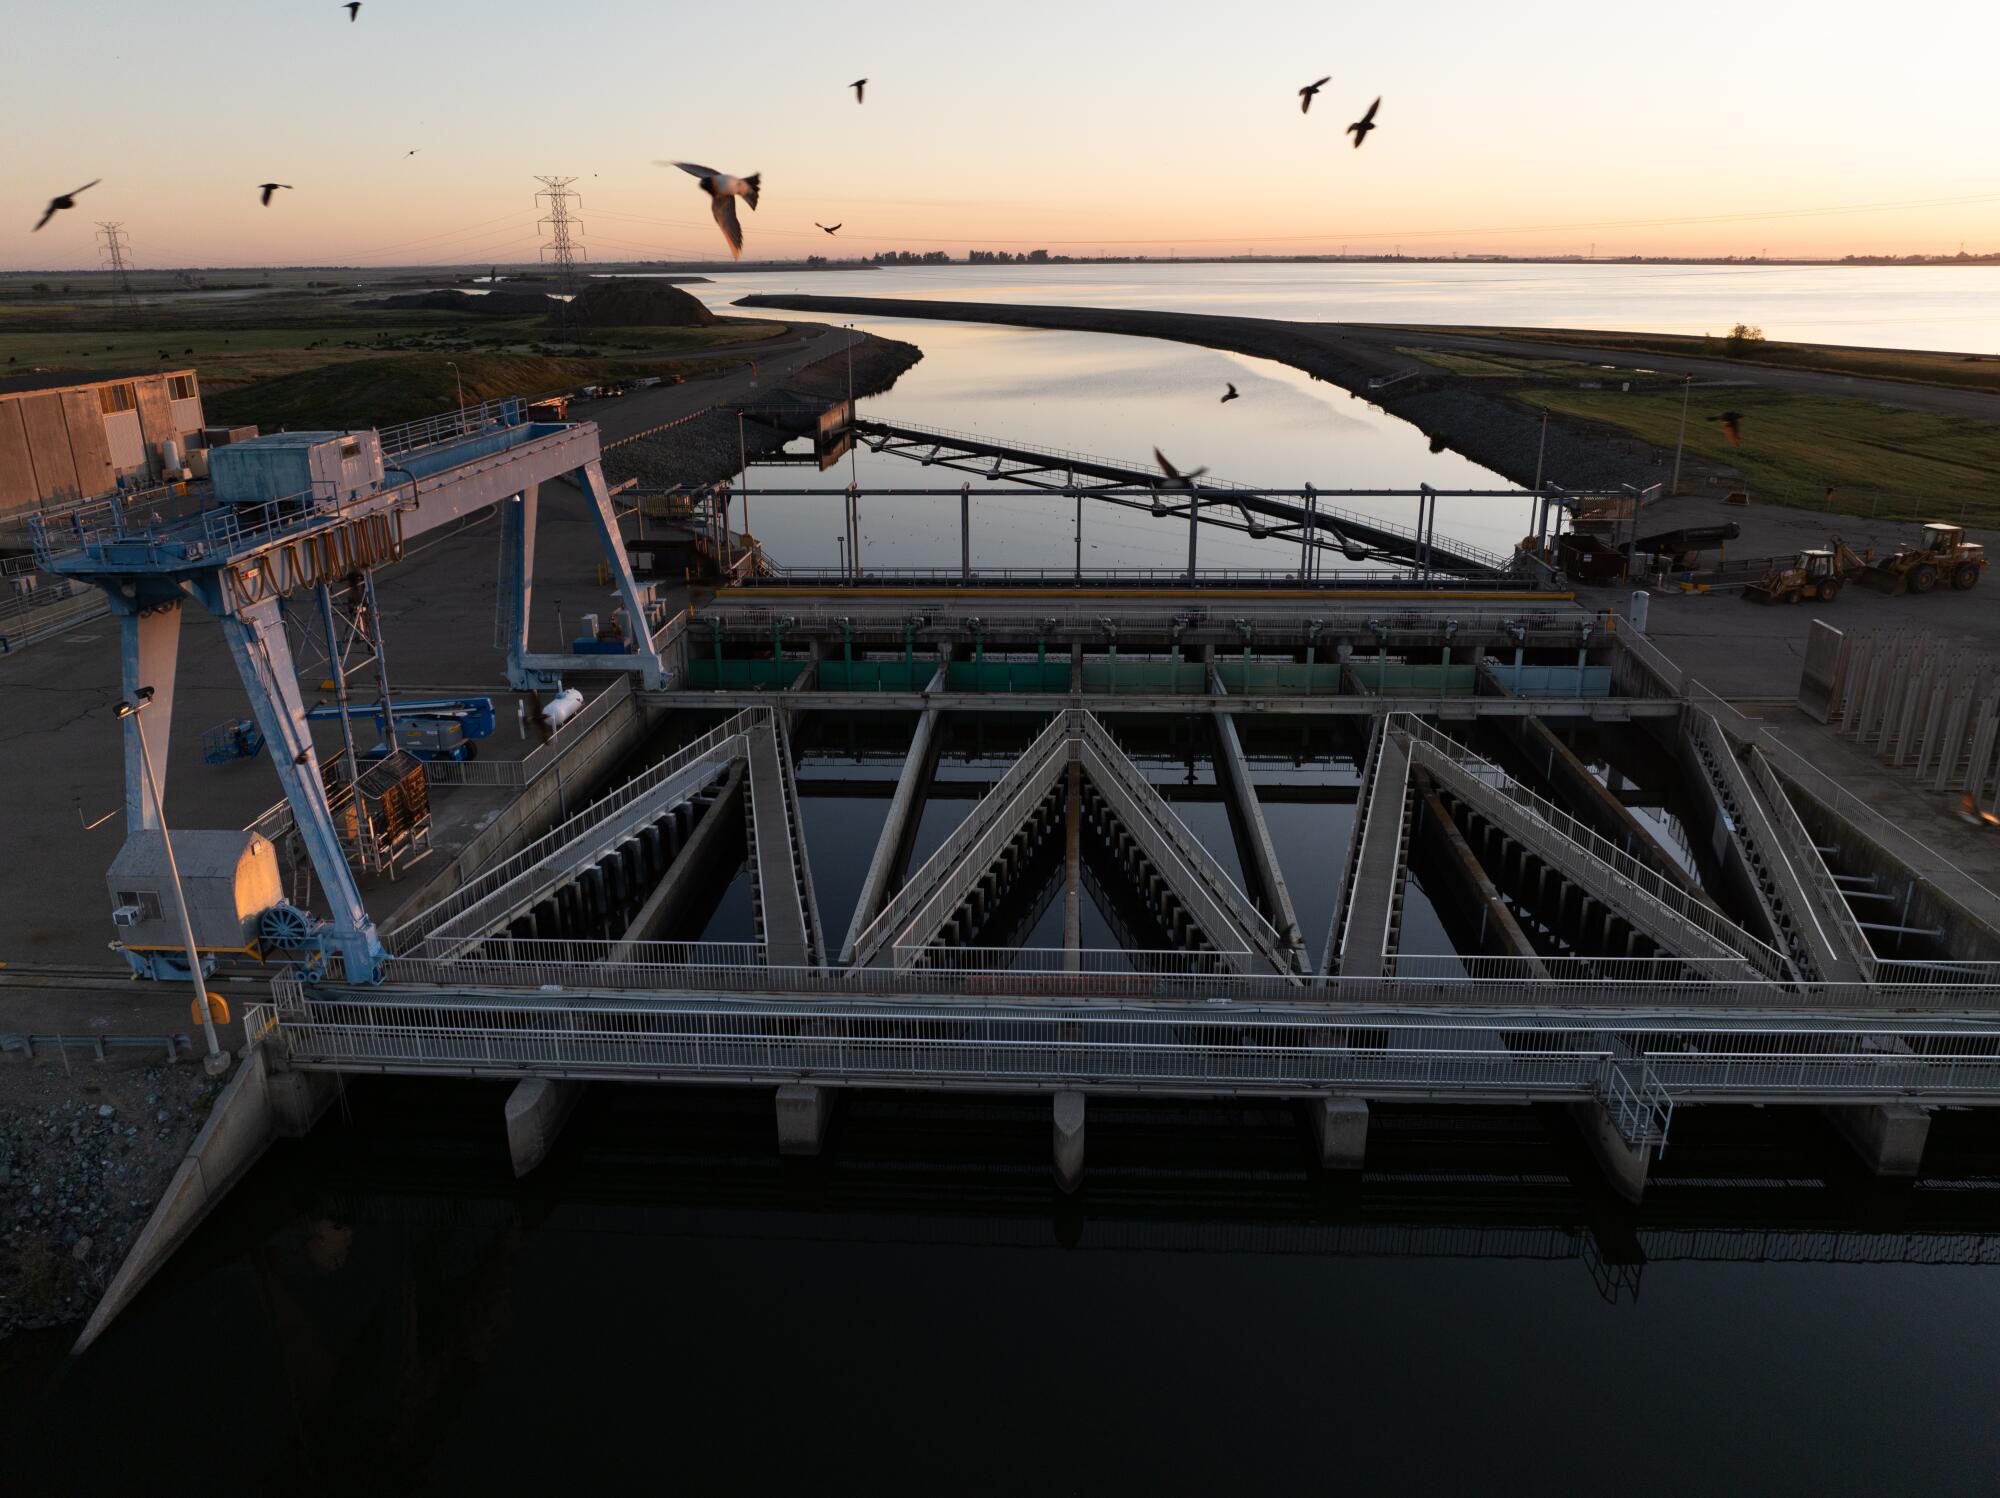 Birds fly over a structure made up of metal louvers that guides fish into the John E. Skinner Delta Fish Protective Facility.